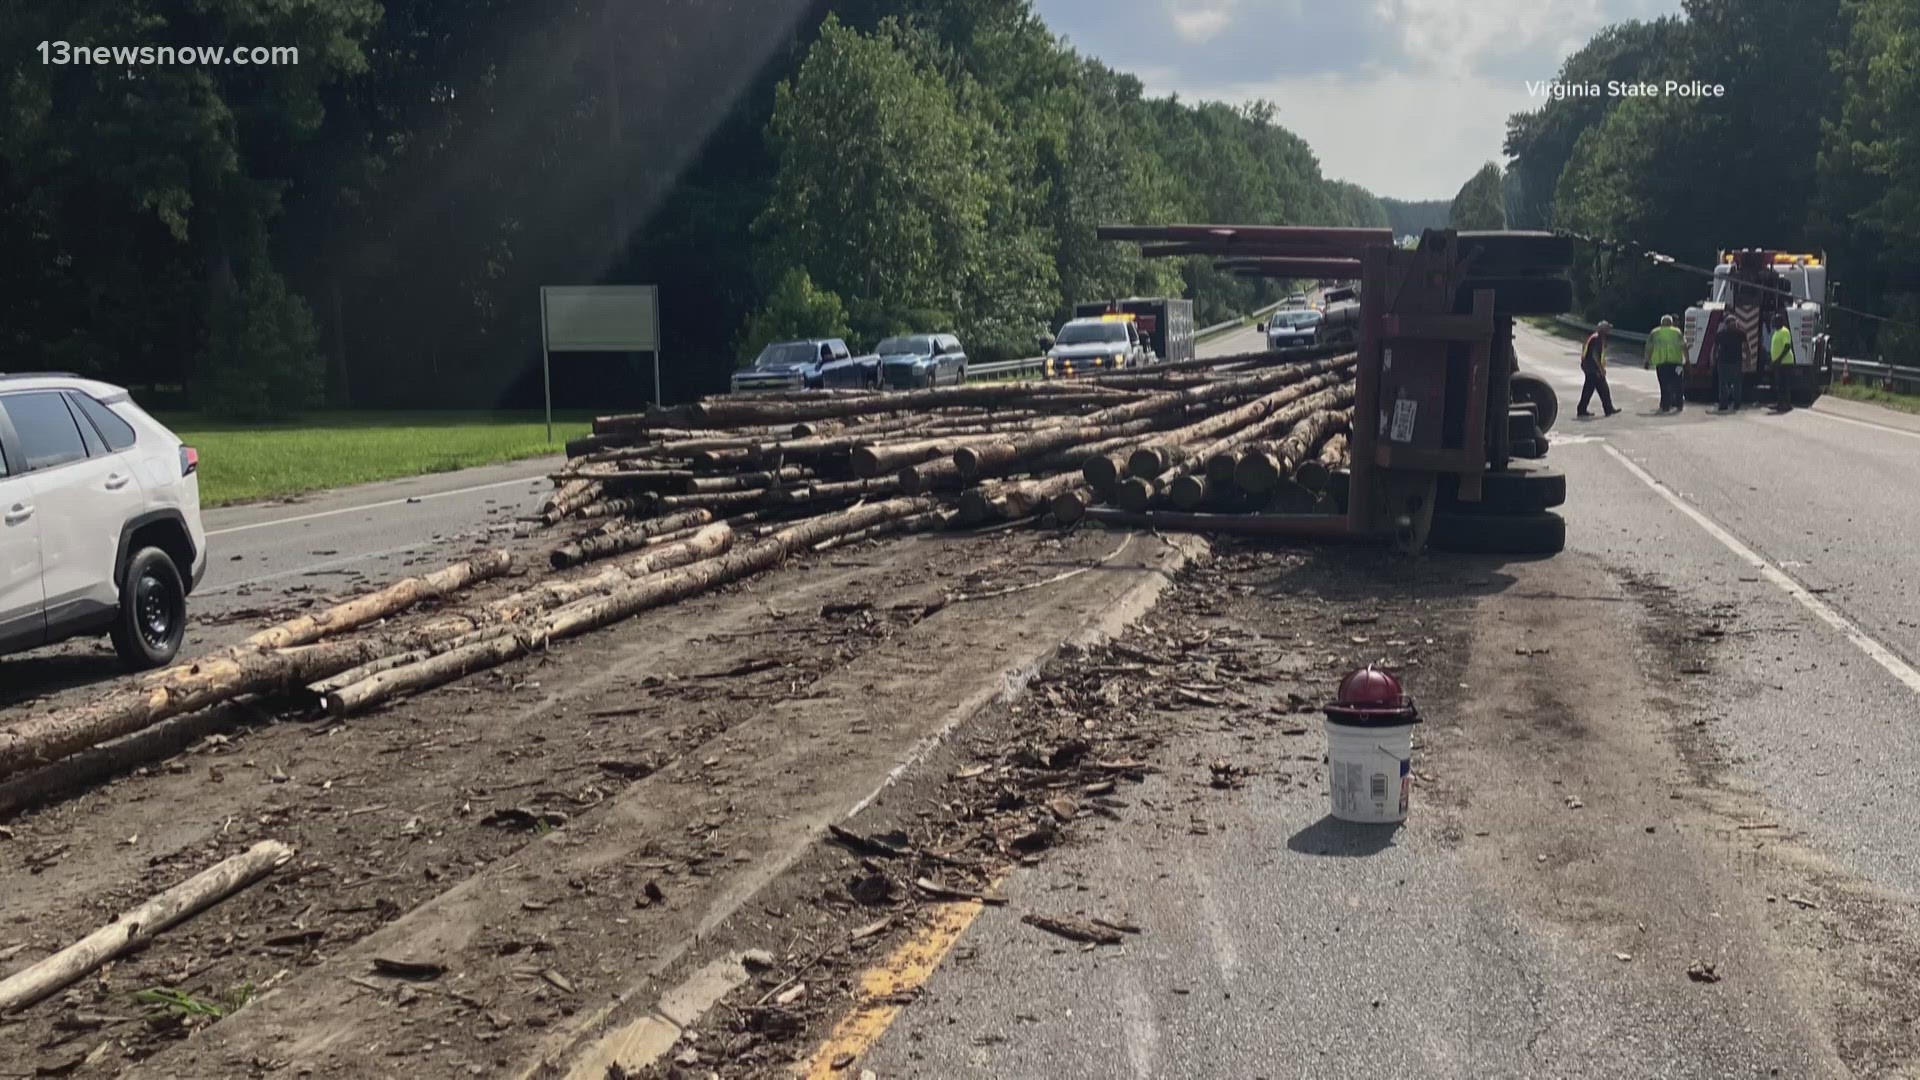 A log truck fell on its side after trying to turn from Route 17 onto Route 33. The logs rolled across the road toward oncoming traffic and hit four cars!